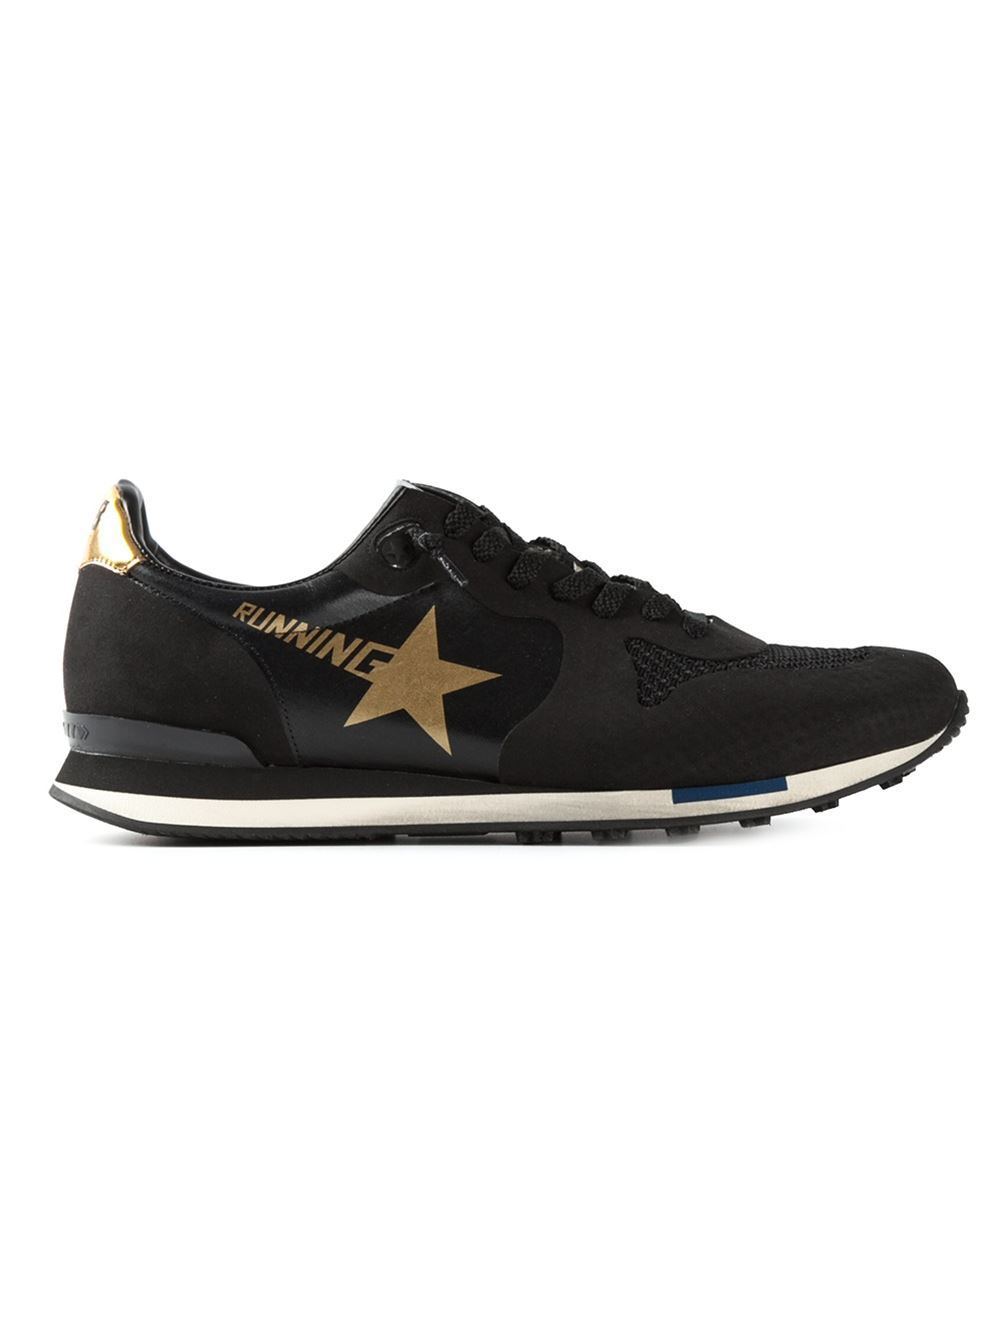 Golden Goose Deluxe Brand Record Edition Sneakers in Black for Men | Lyst